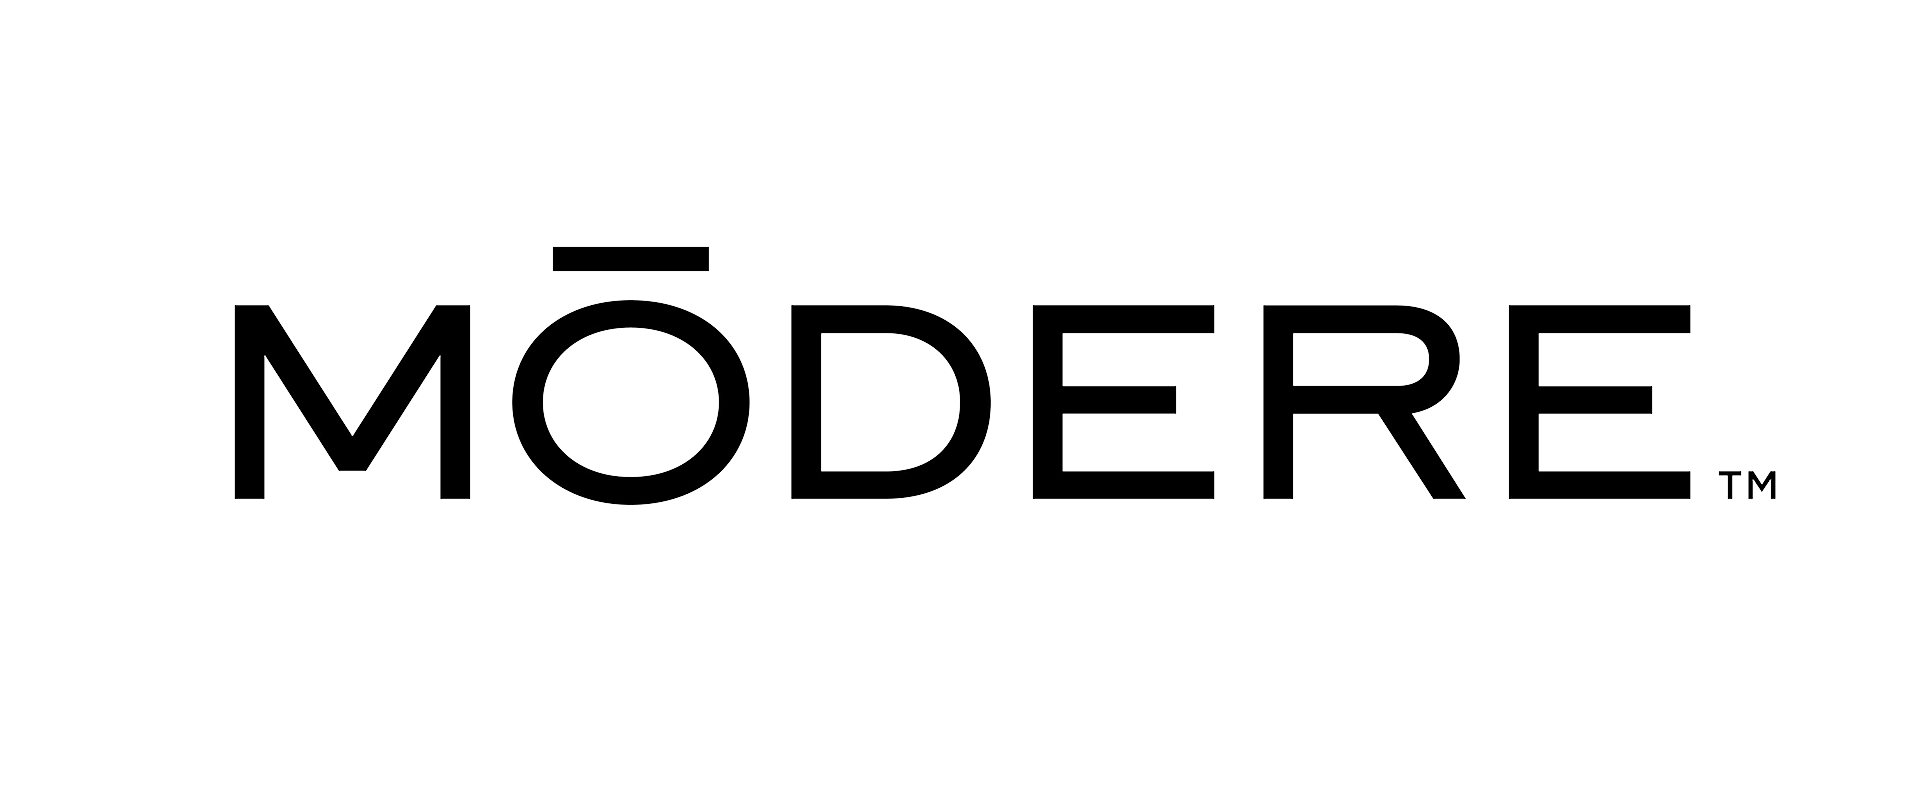 MODERE-logo-1.png